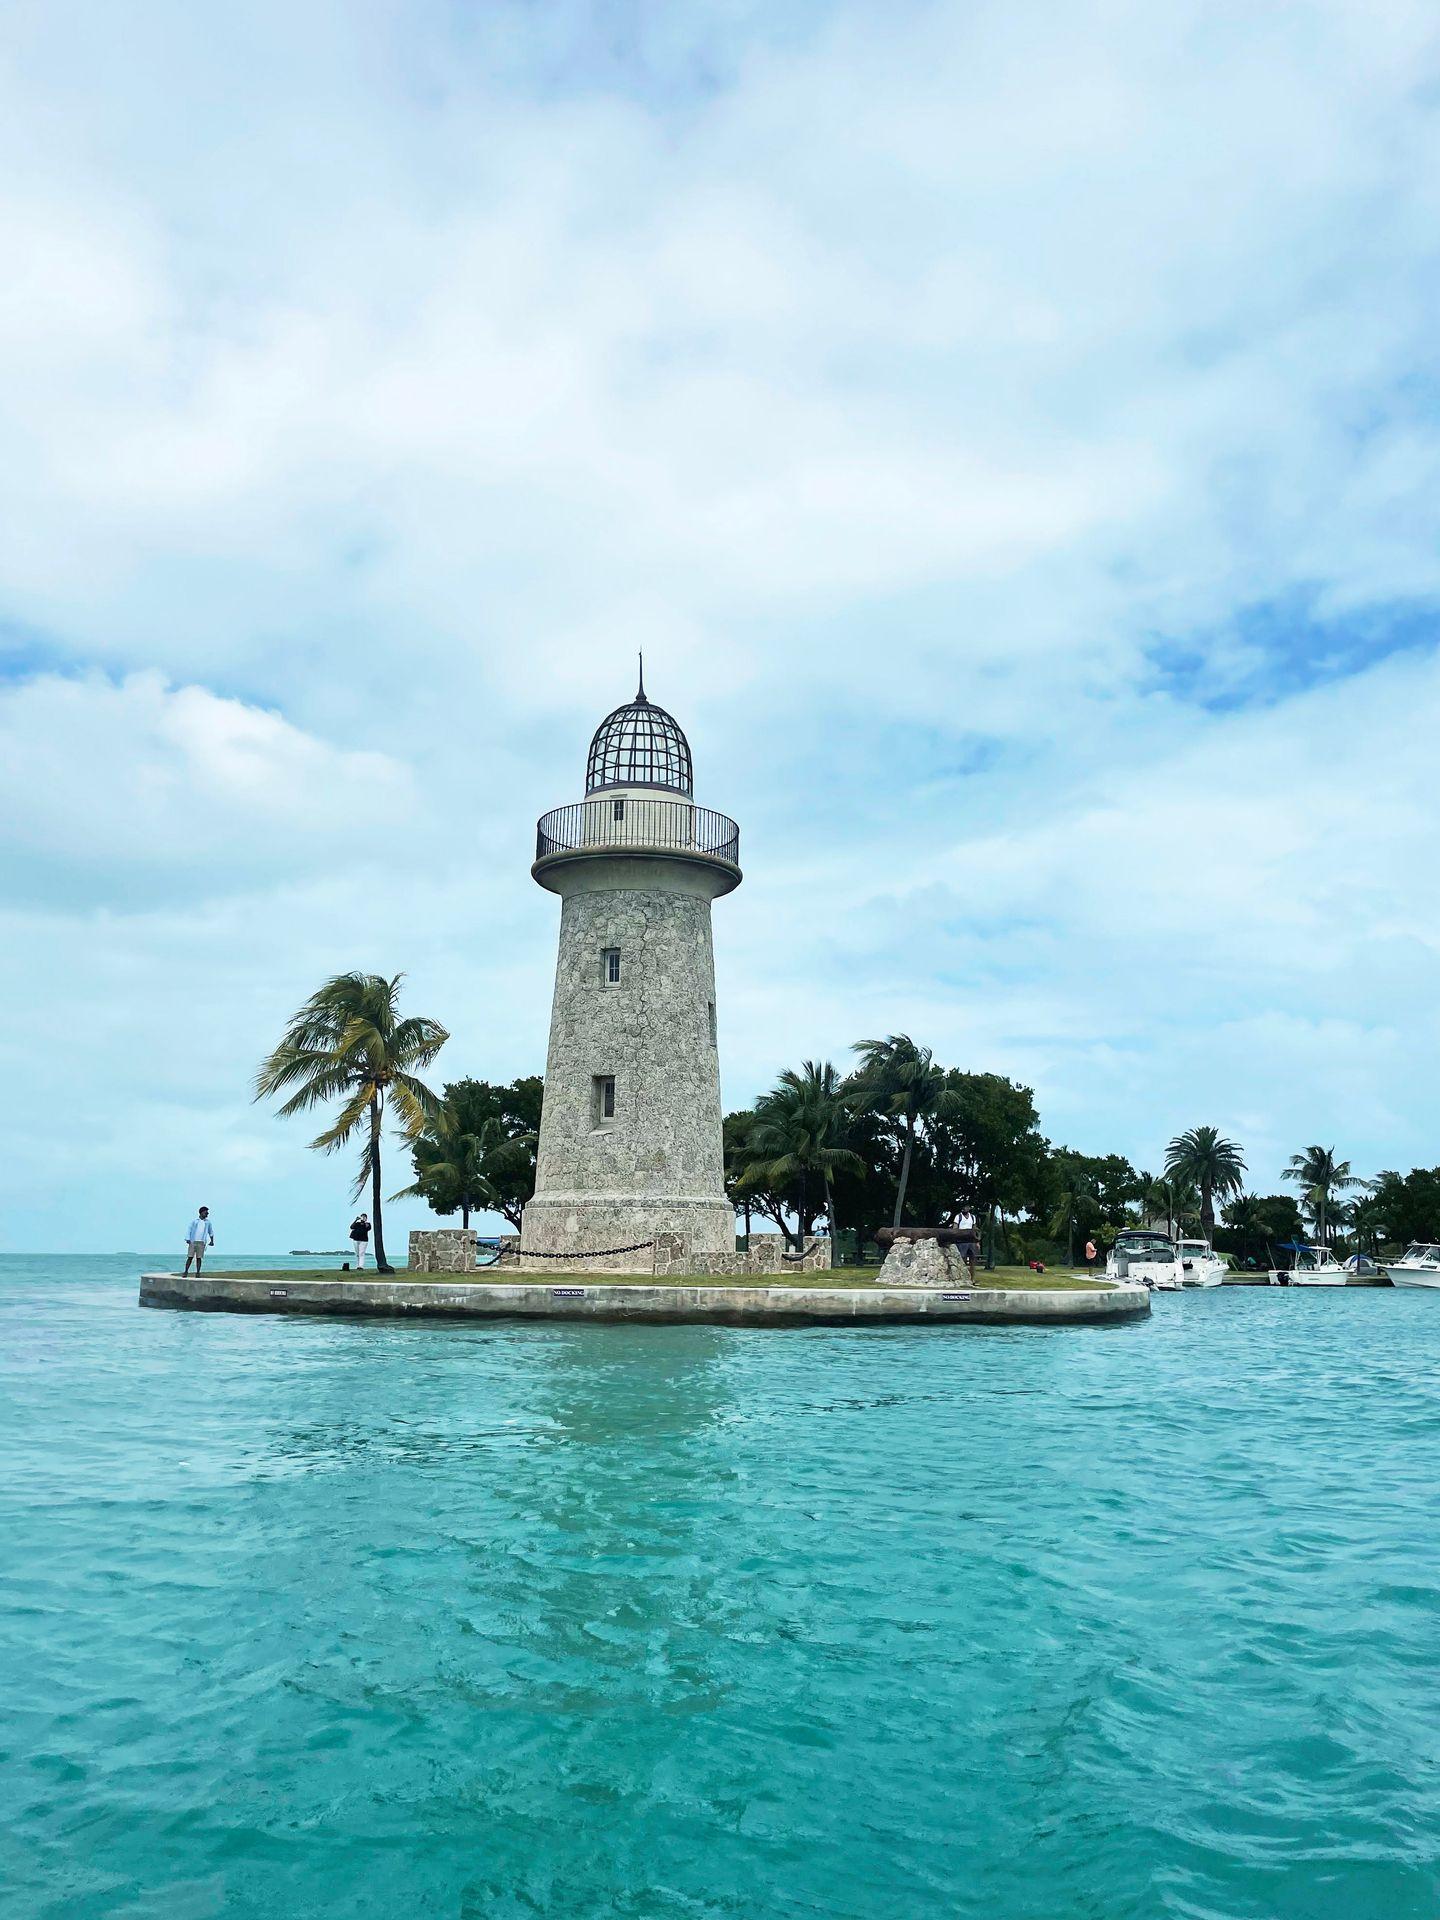 A lighthouse next to blue water in Biscayne National Park.